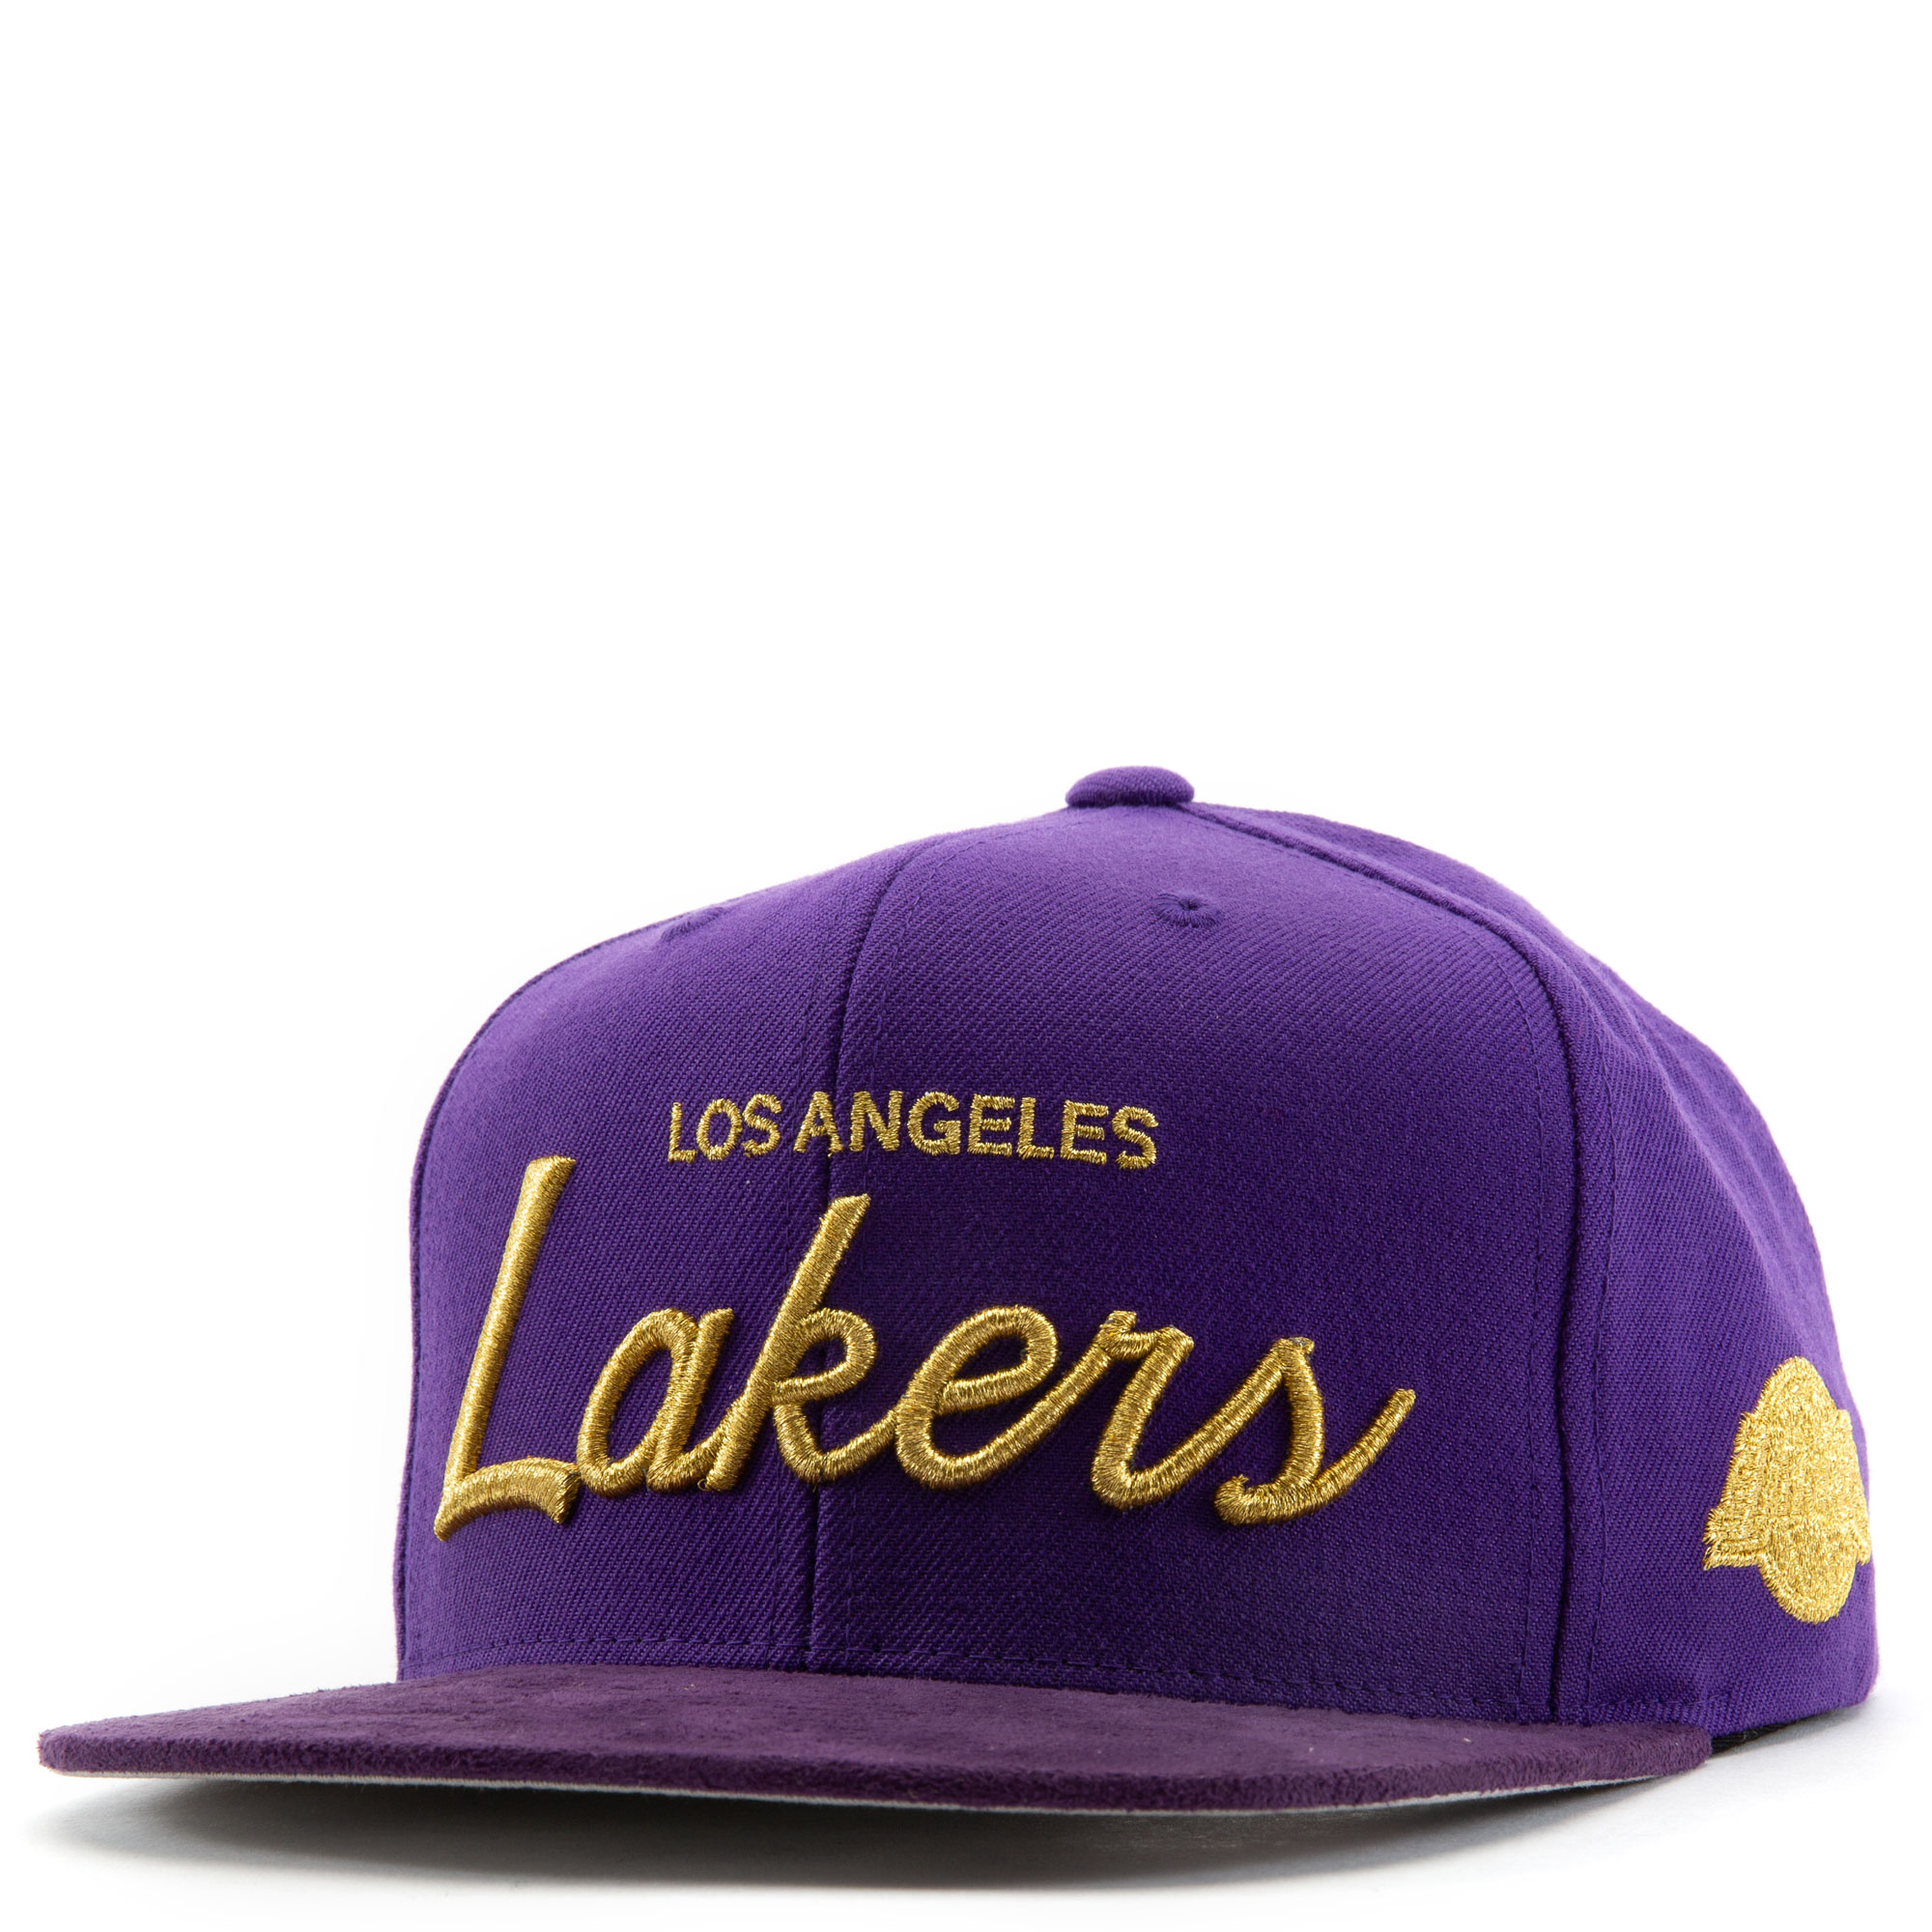 Mitchell & Ness Los Angeles Lakers Cream Team Script Pro Crown